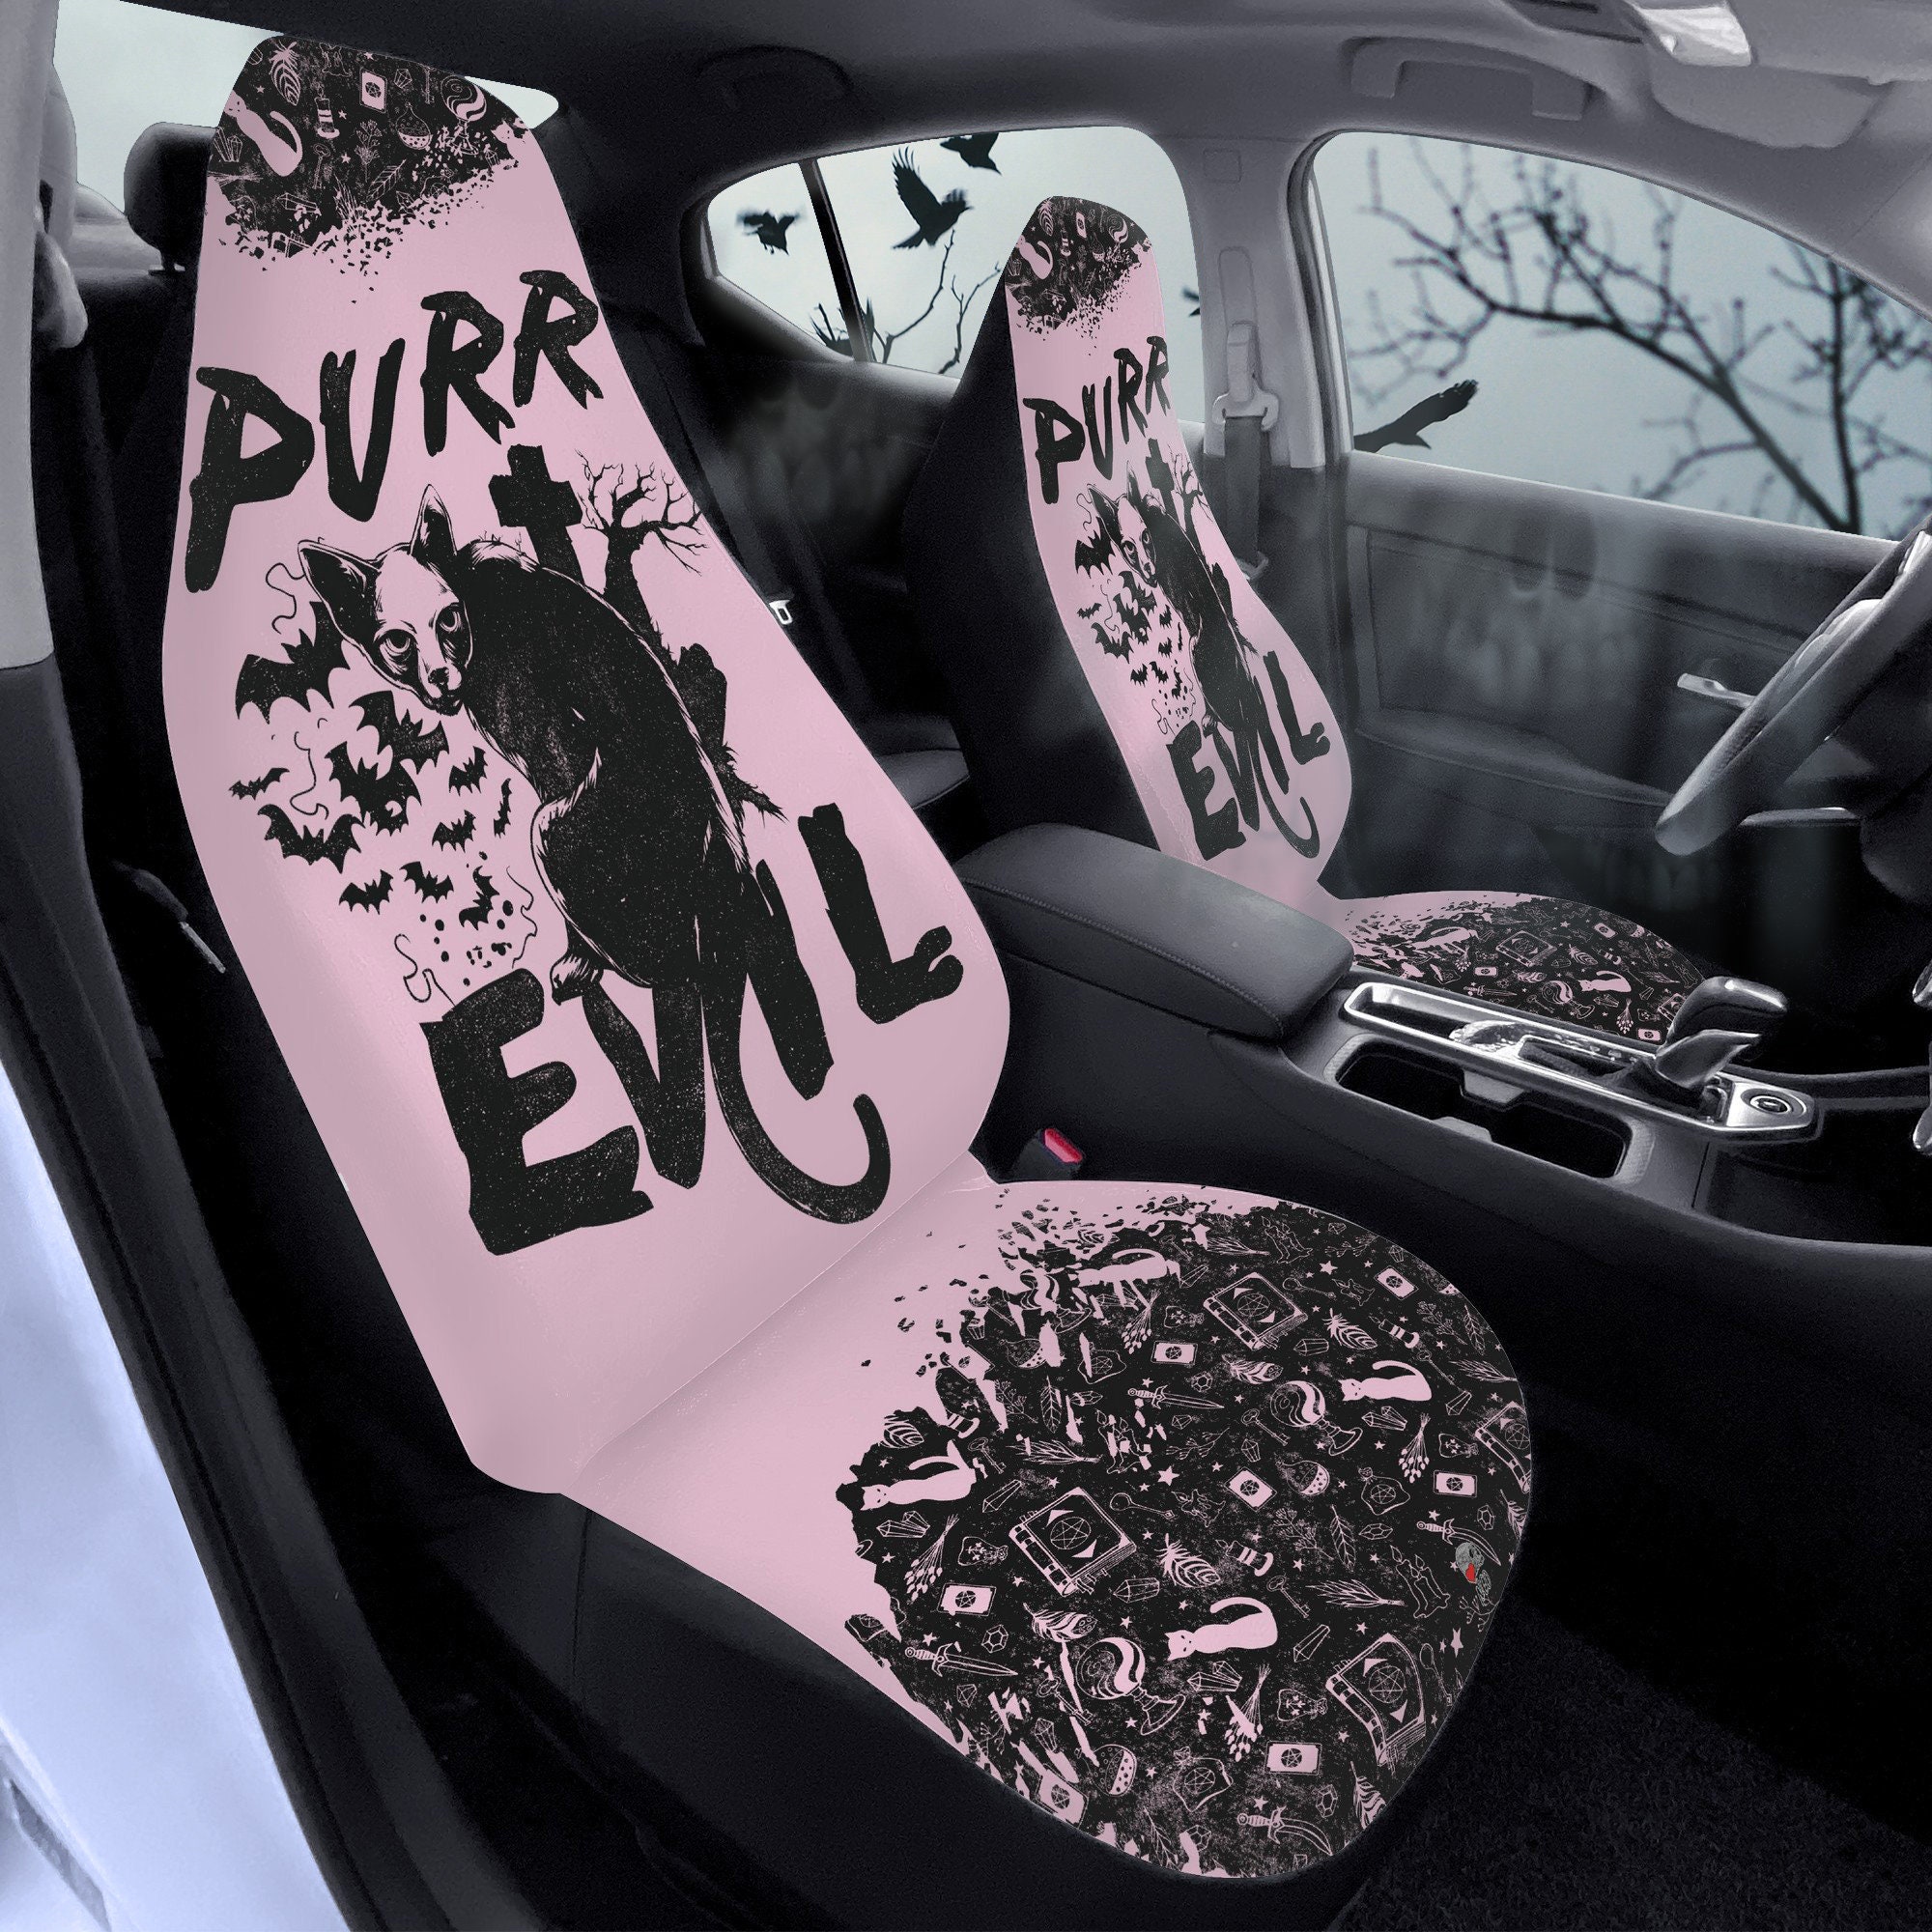 Goth Car Seat Covers, Gothic Vehicle Accessories, Creepy Spiderweb Pattern  Alt Edgy Spooky Red Black Dark Witchy Vampire Aesthetic -  Israel